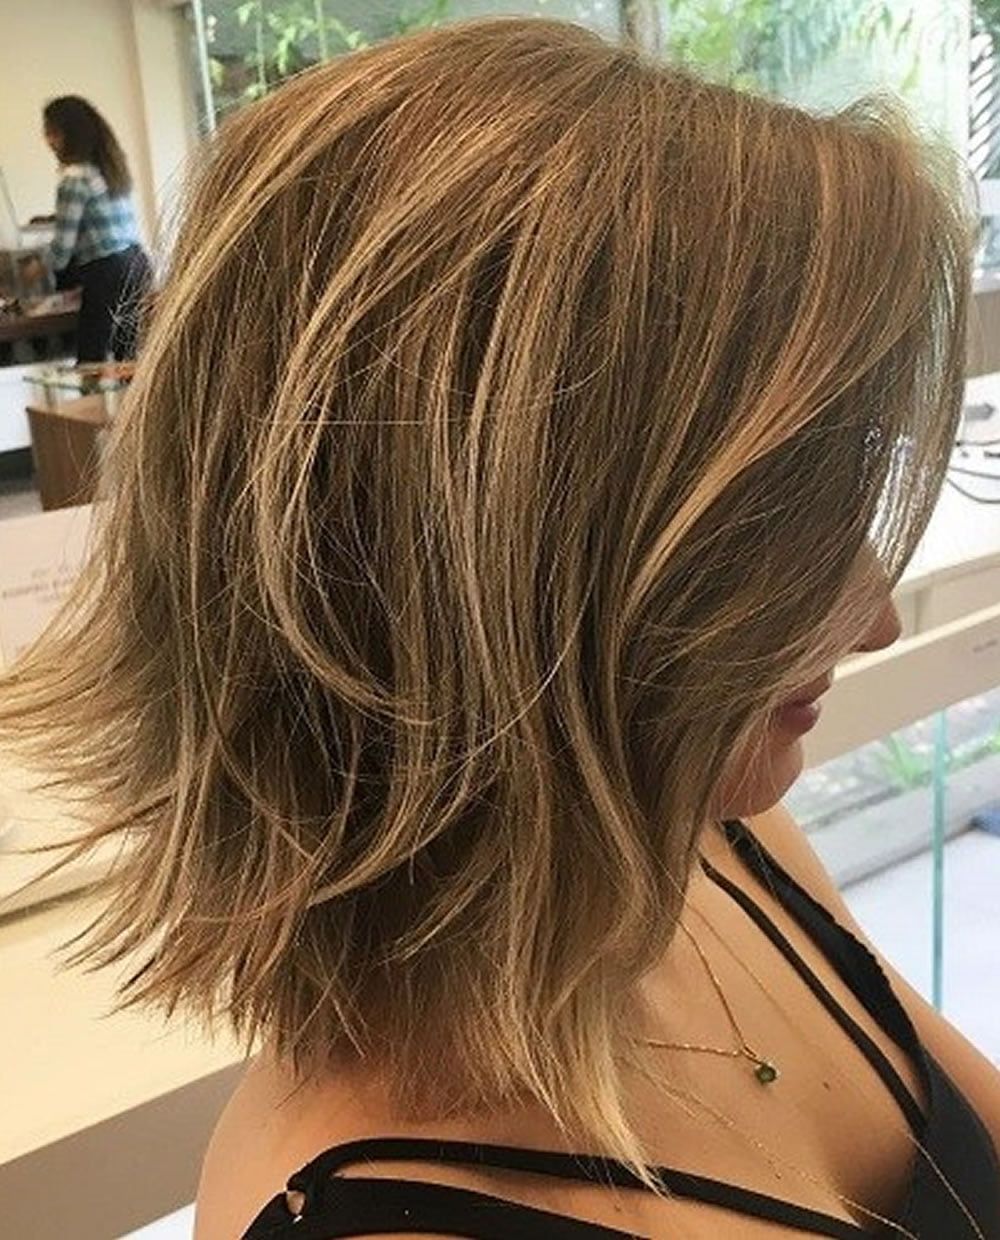 Layered Long Bob Hairstyles And Lob Haircuts 2018 – Hairstyles For Most Recently Released Wavy Textured Haircuts With Long See Through Bangs (Gallery 19 of 20)